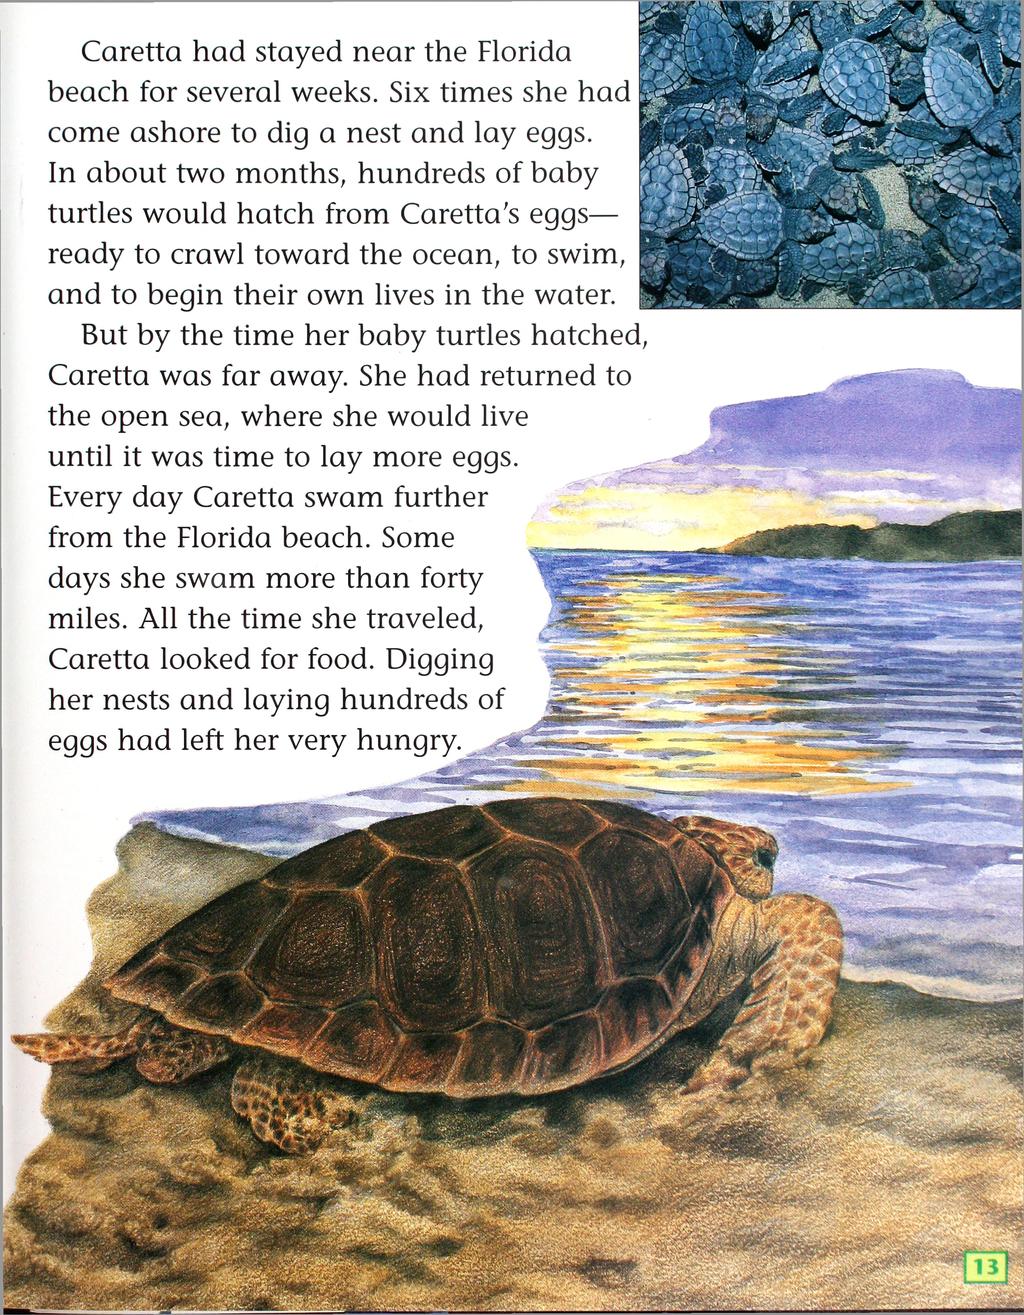 Caretta had stayed near the Florida beach for several weeks. Six times she had come ashore to dig a nest and lay eggs.